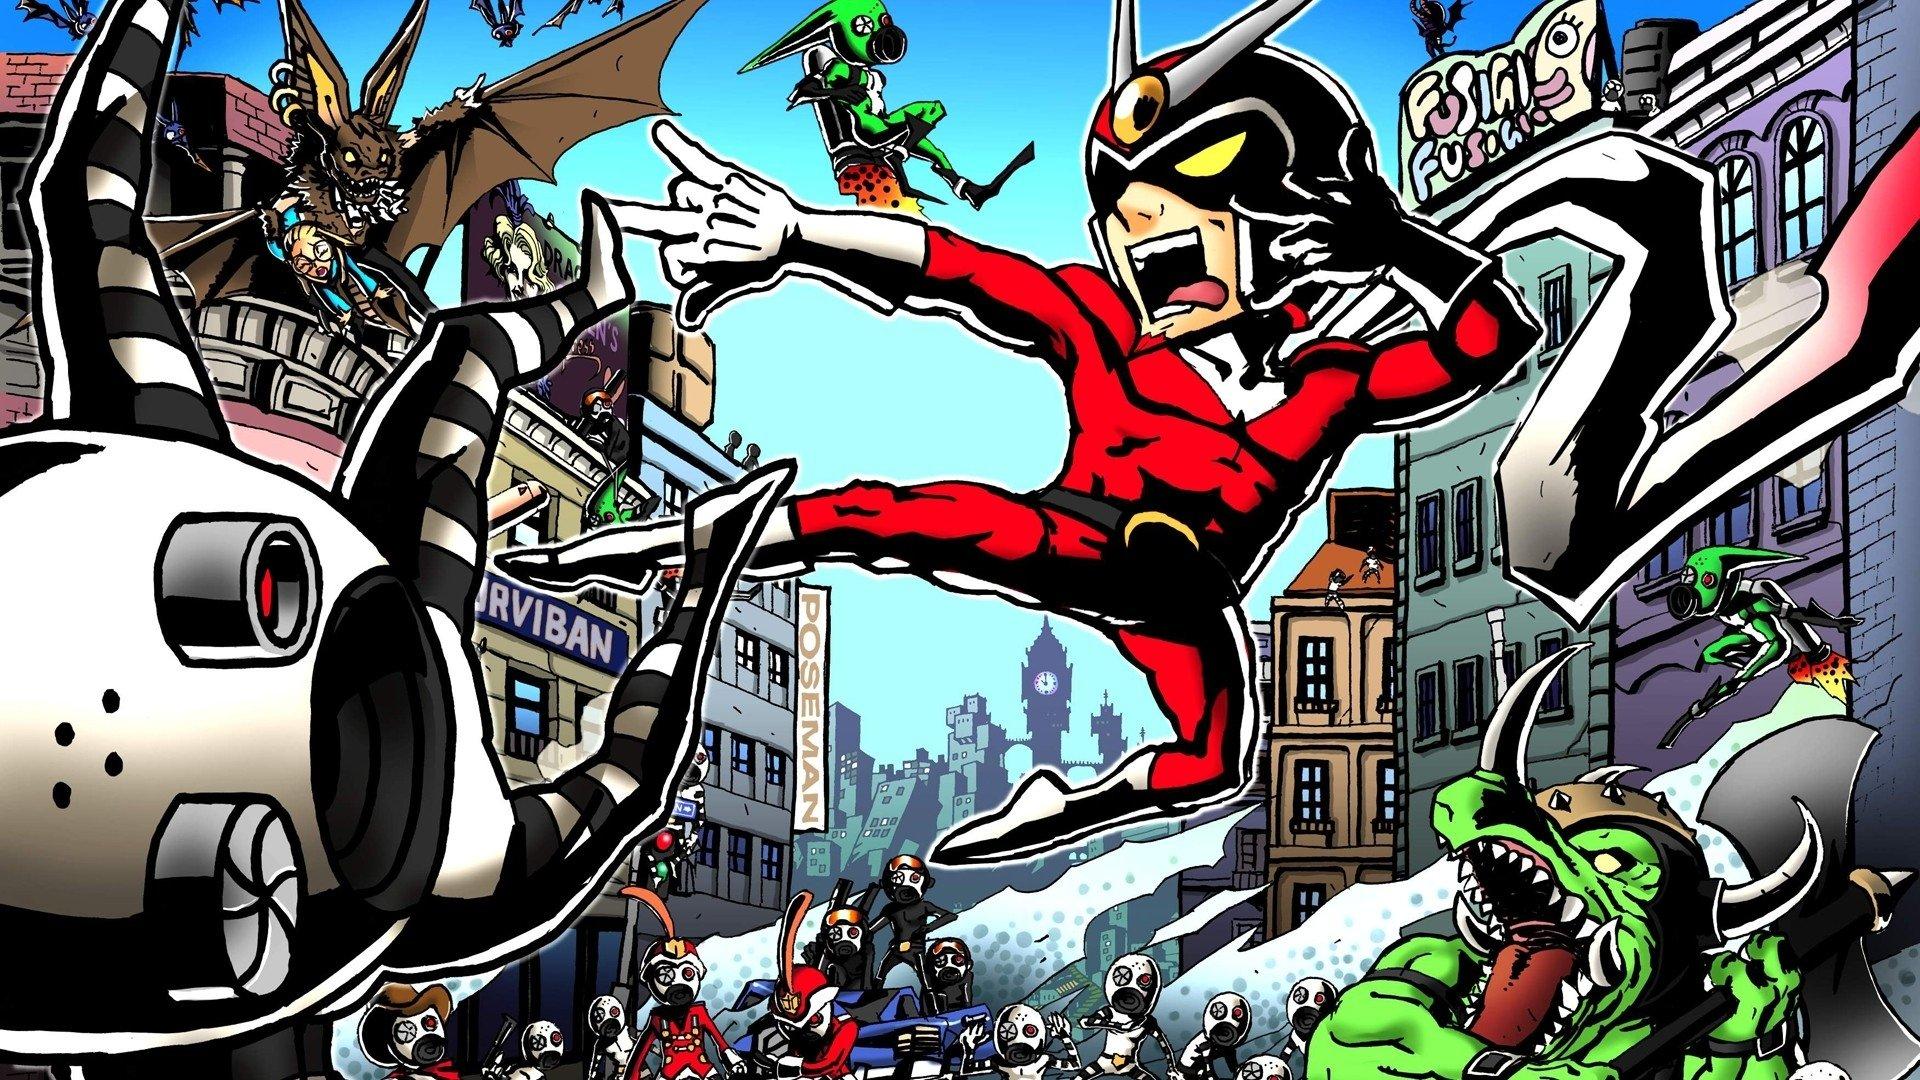 2005KidsWb20 Viewtiful Joe EP12 Dude wheres my Vwatch  Free  Download Borrow and Streaming  Internet Archive